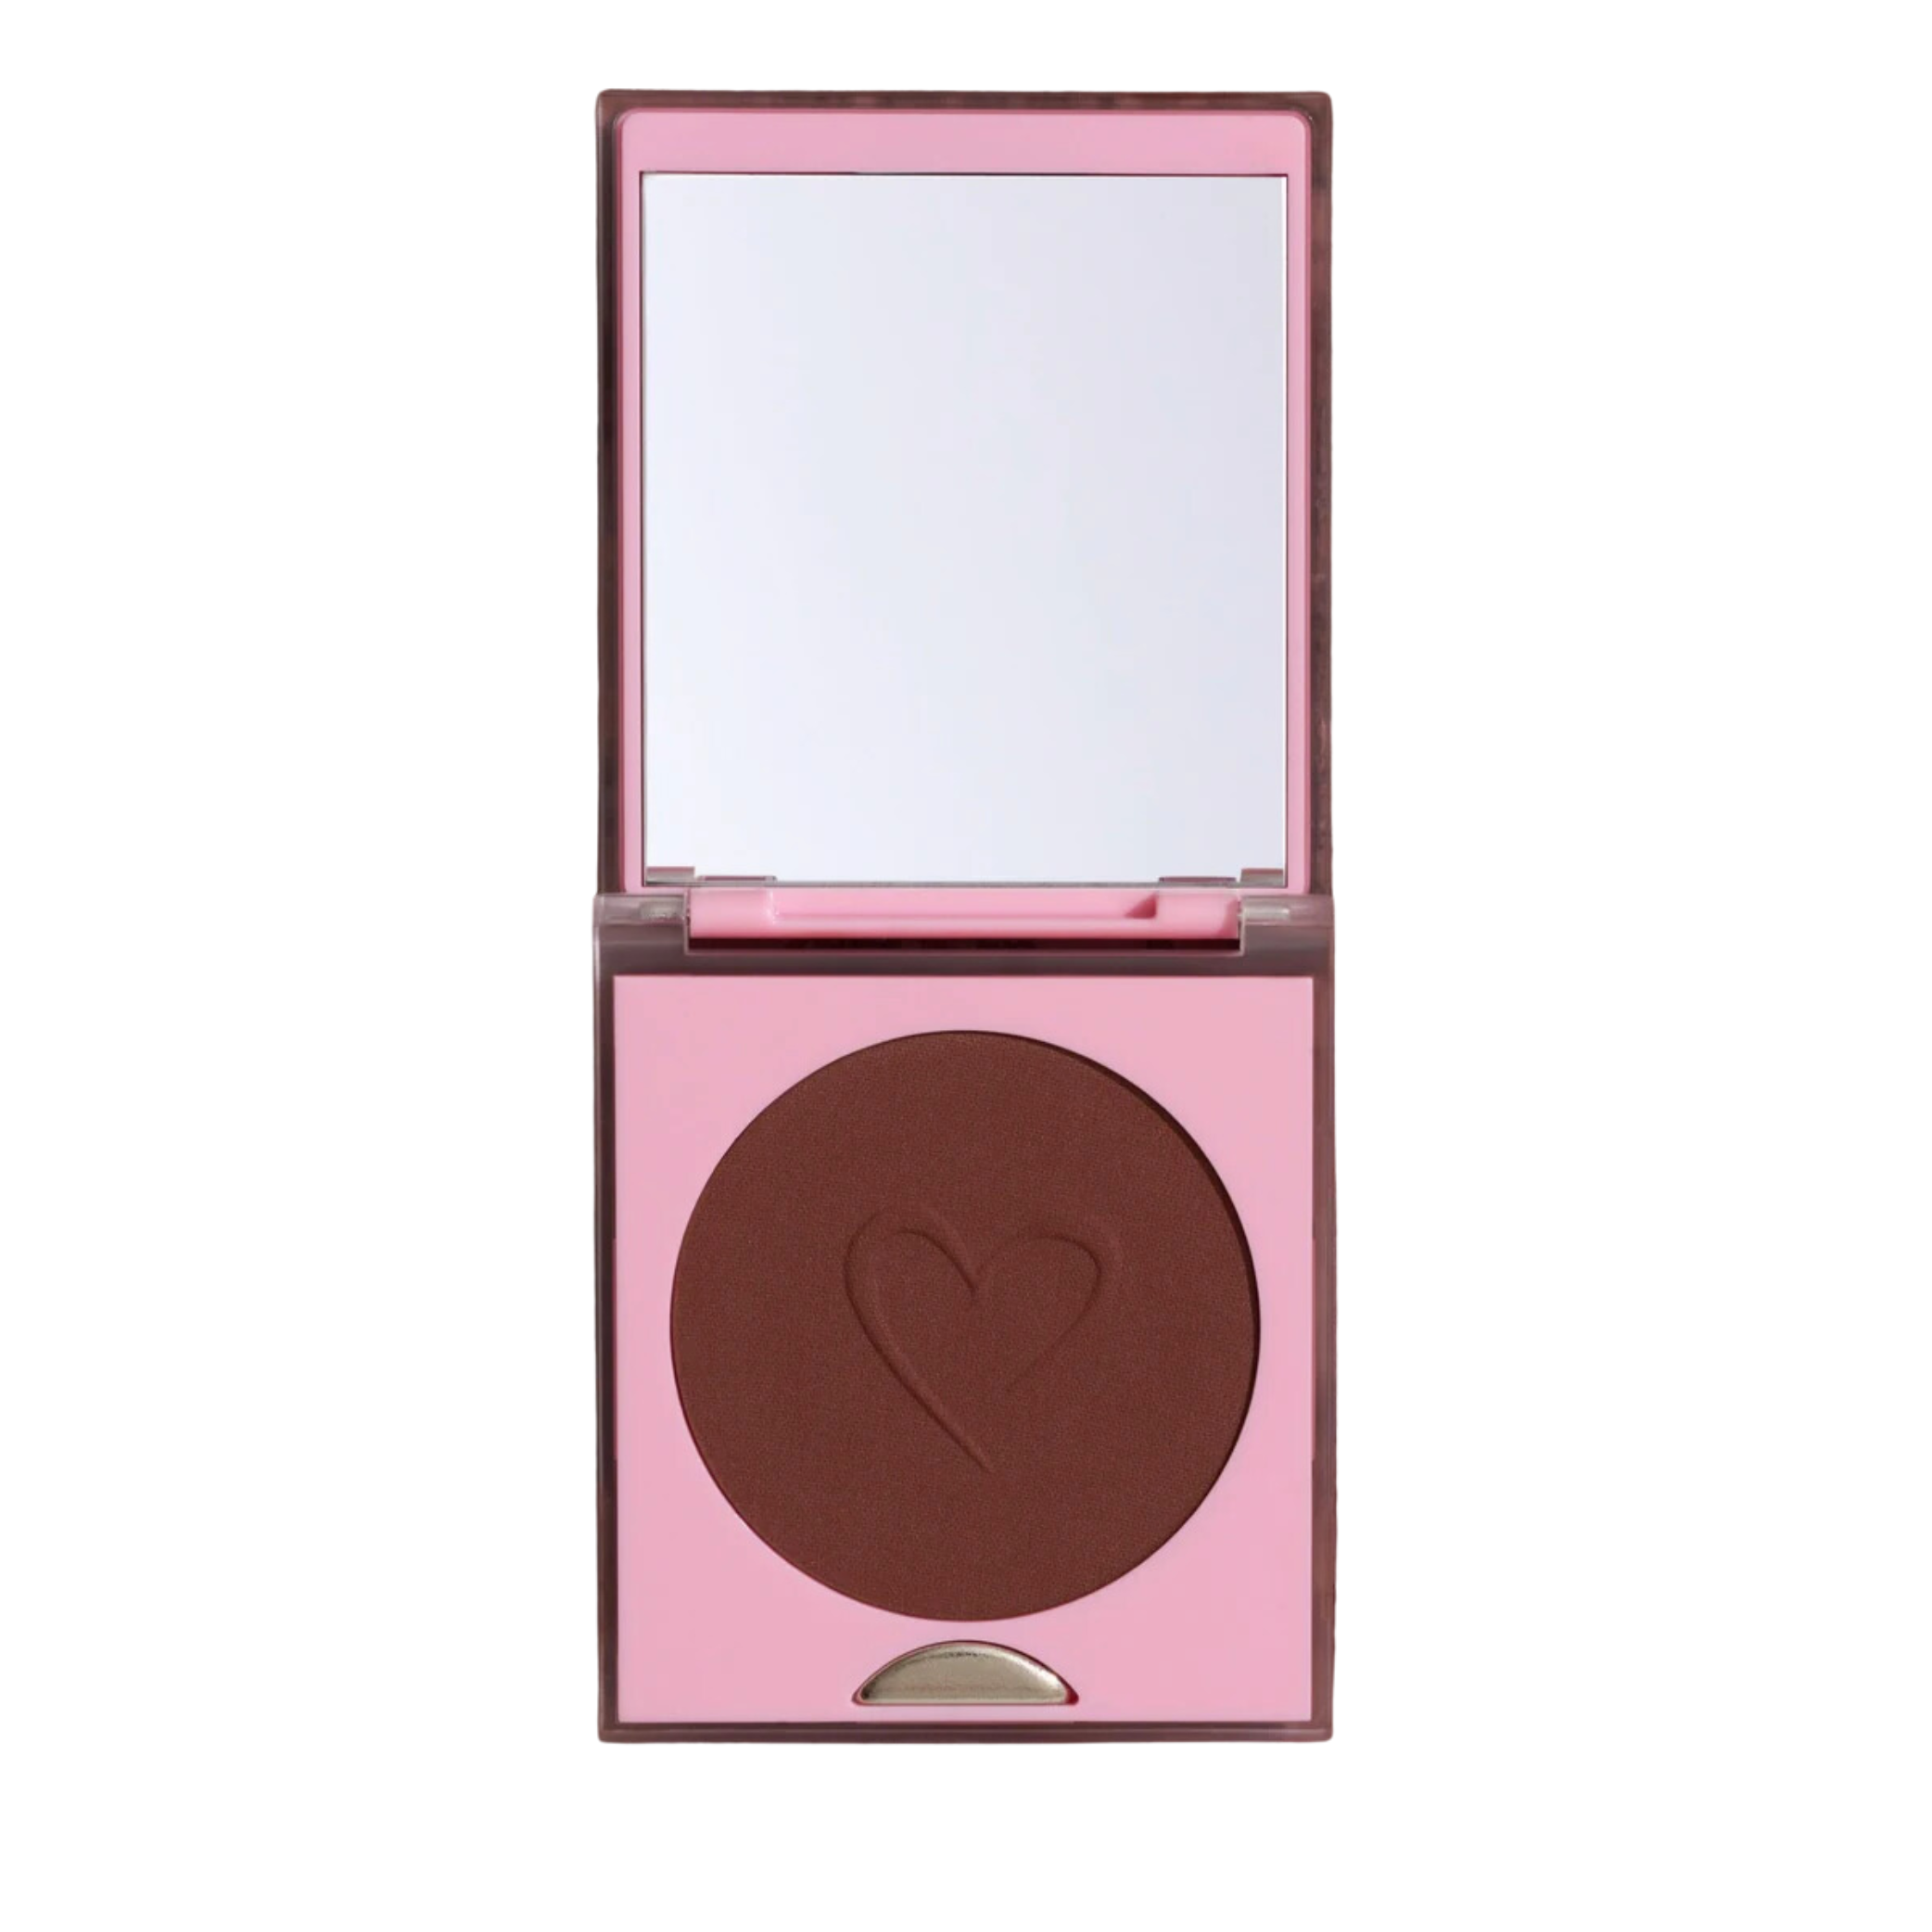 Bronzer  Sunkissed  - Beauty Creations